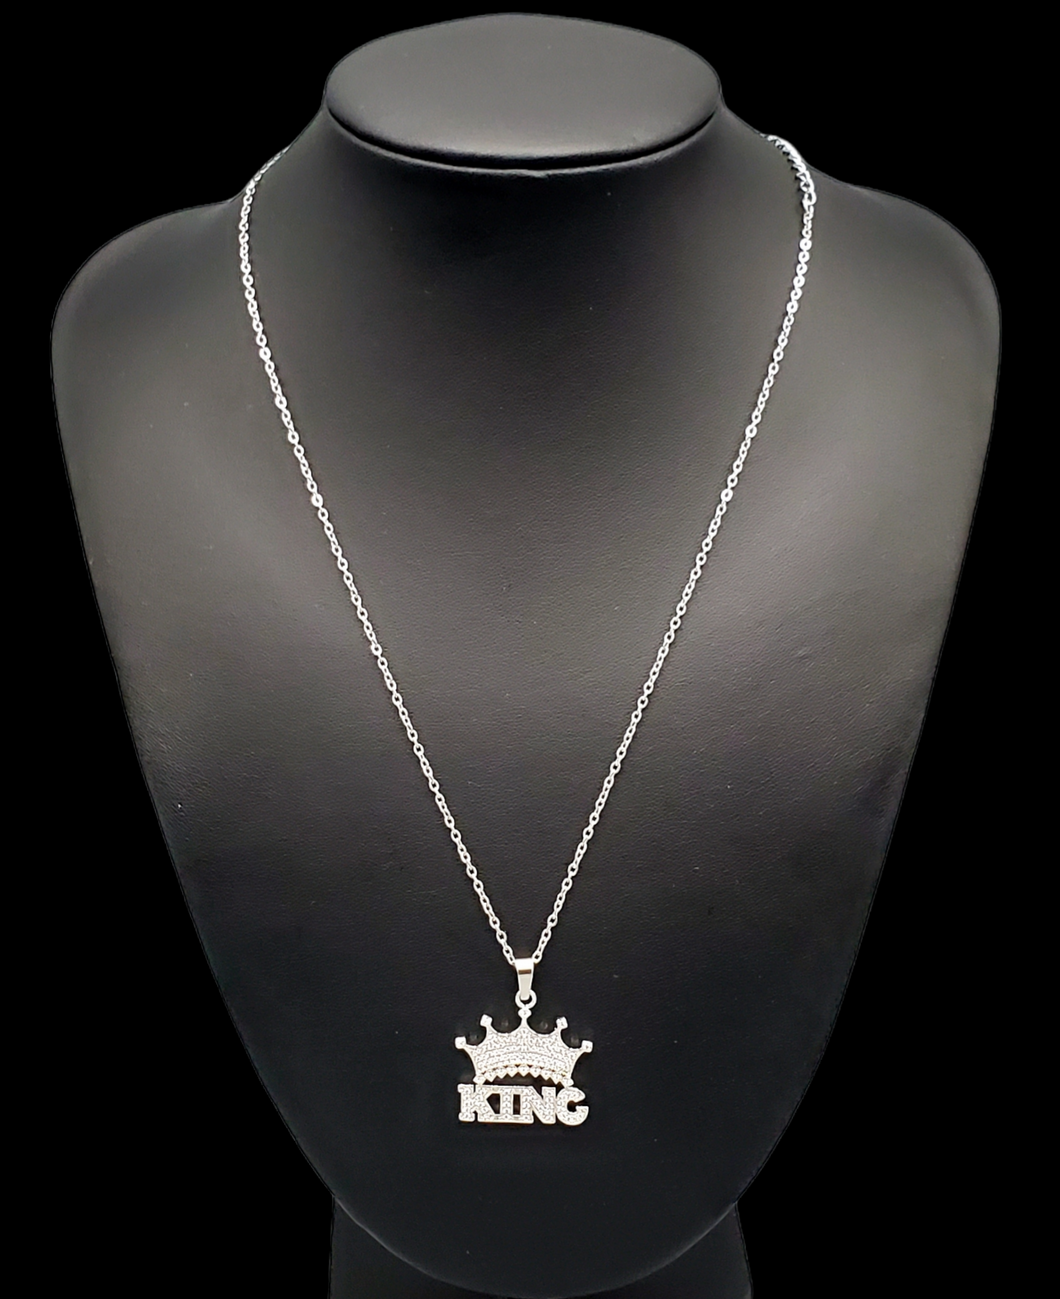 Be the King Necklace and Pendant